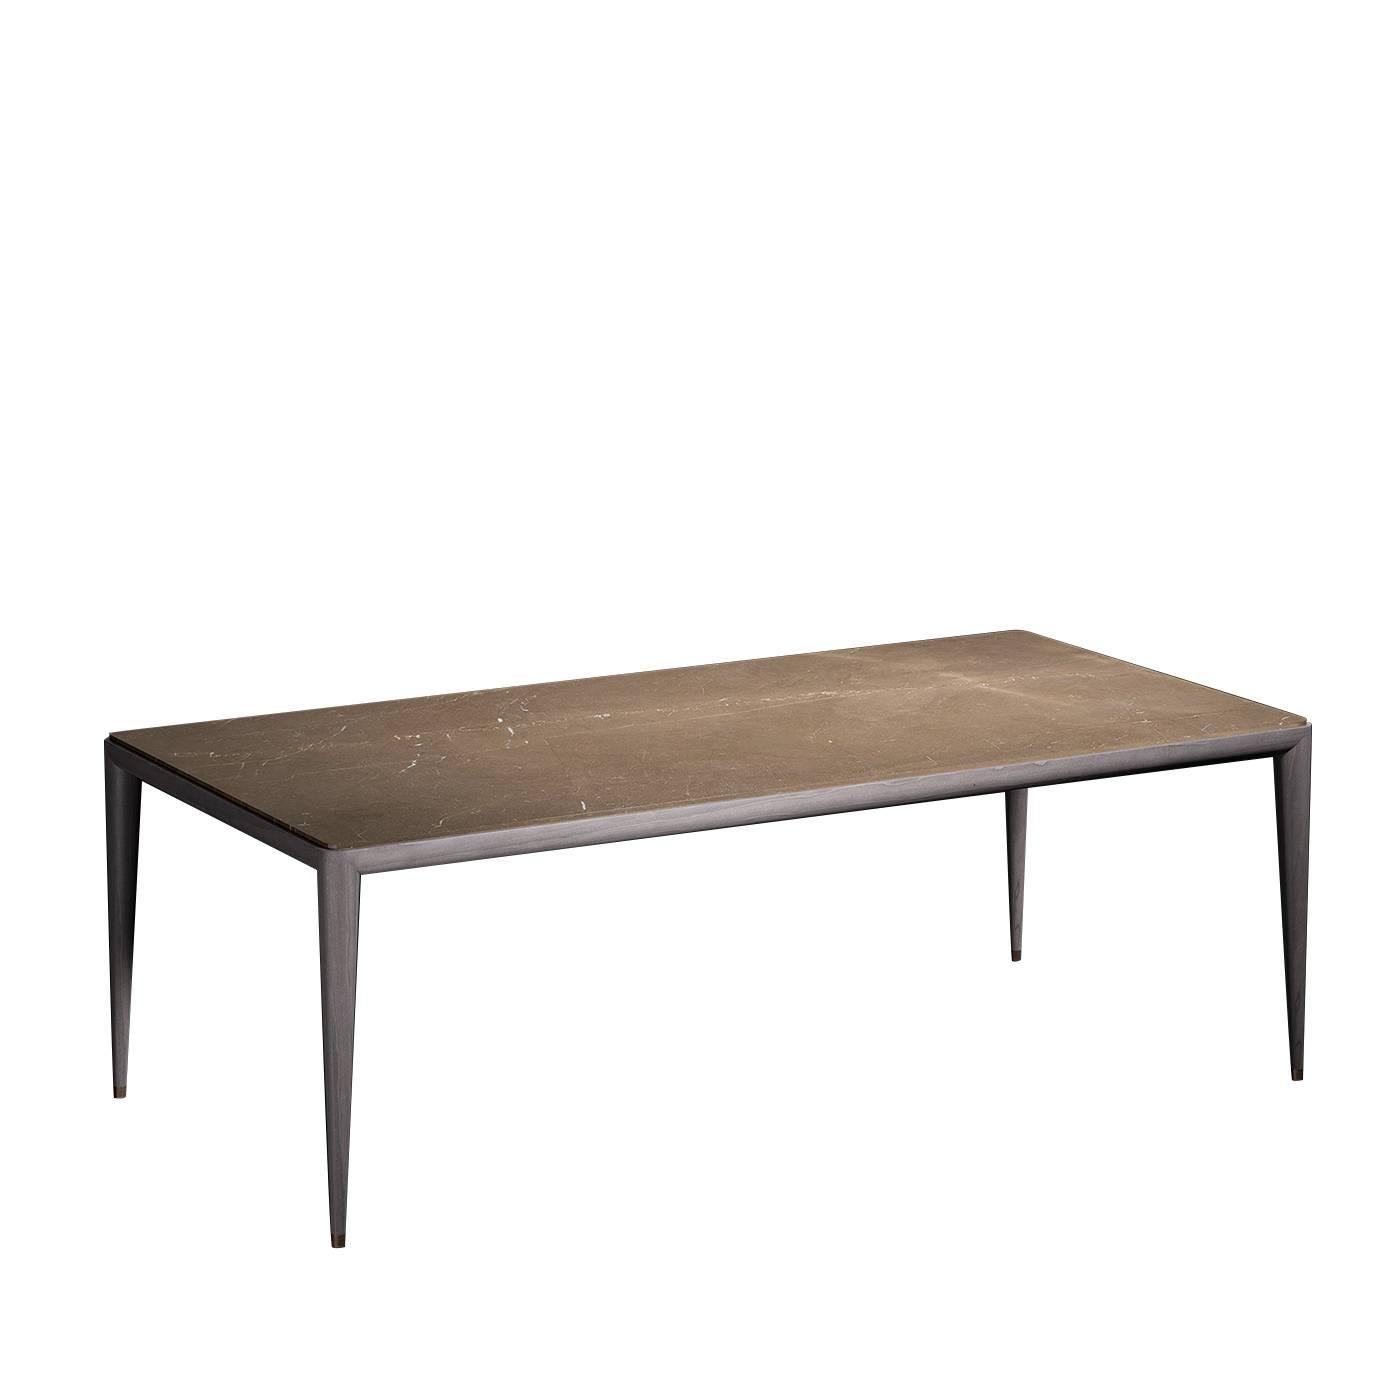 Bluemoon Rectangular Dining Table For Sale